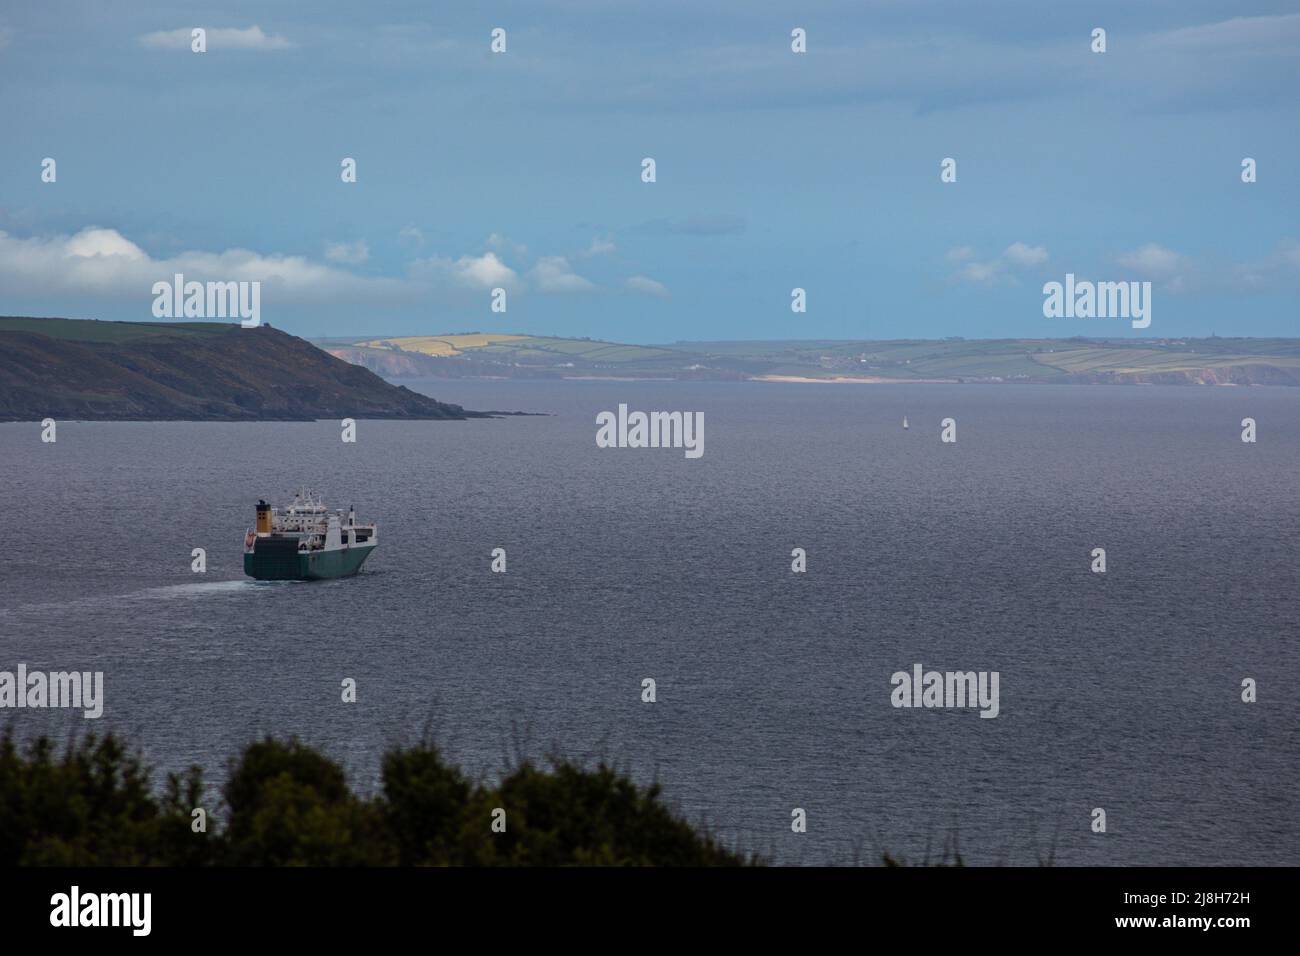 A ship leaves Plymouth in the English Channel, view from Rame head Peninsula Stock Photo